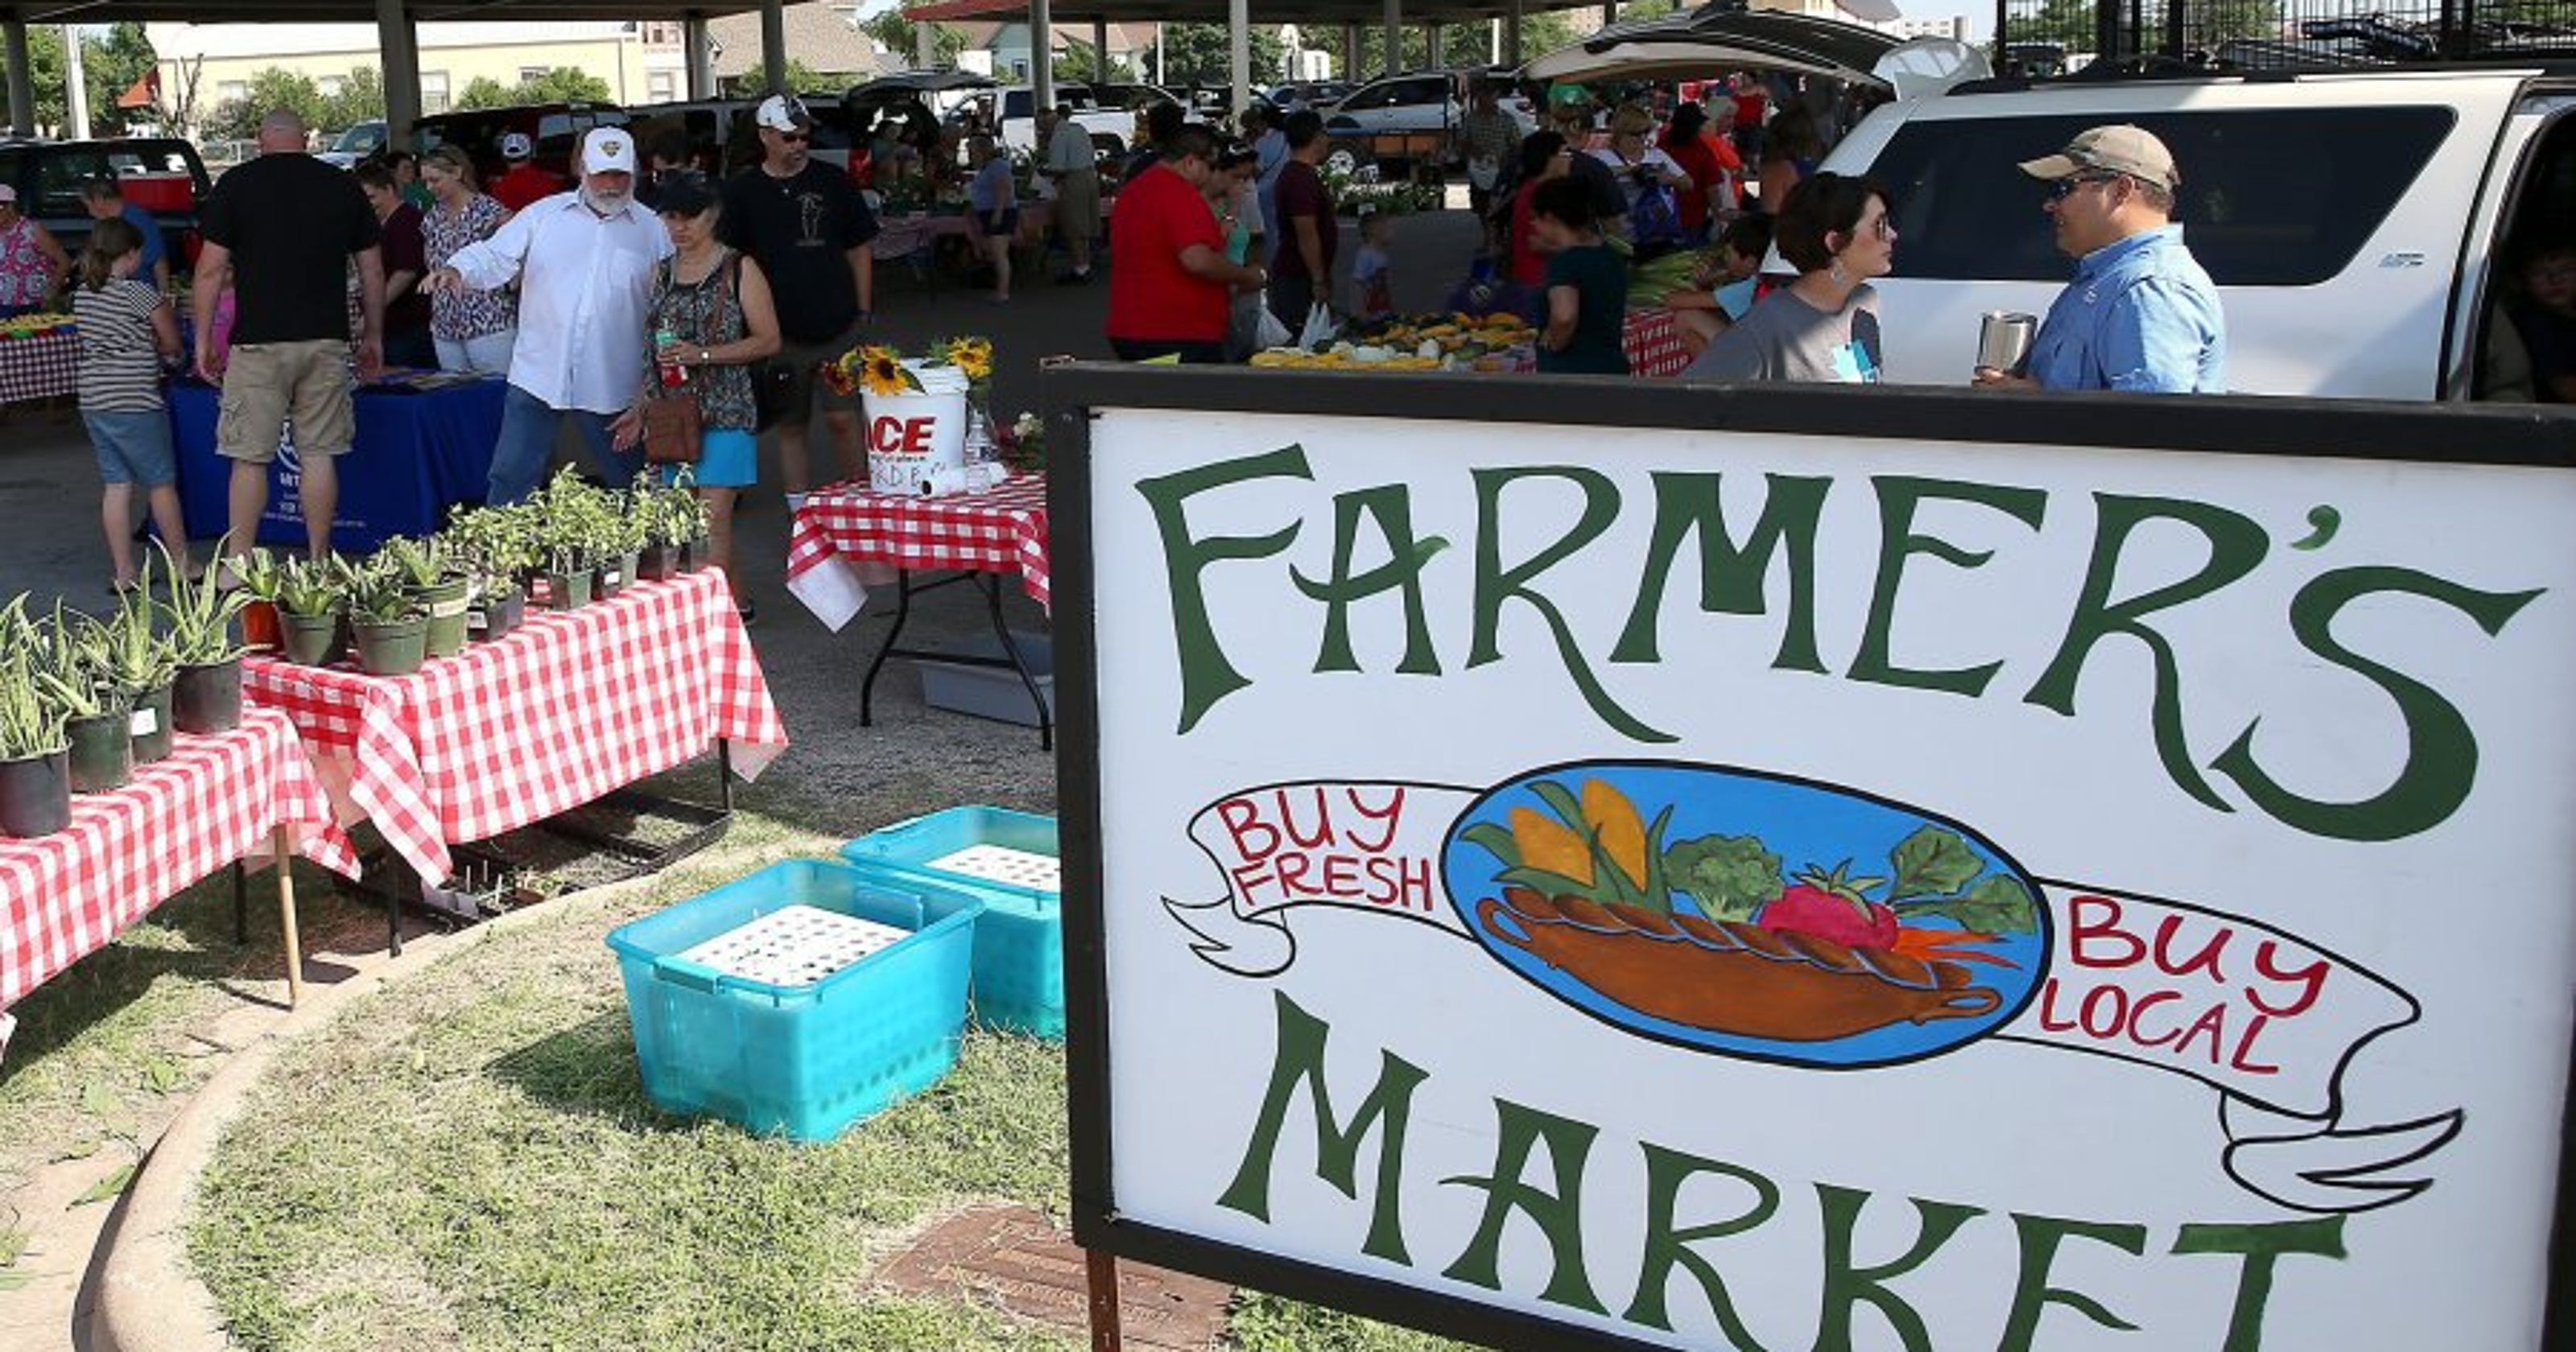 Here's where to find farmers markets in and around San Angelo